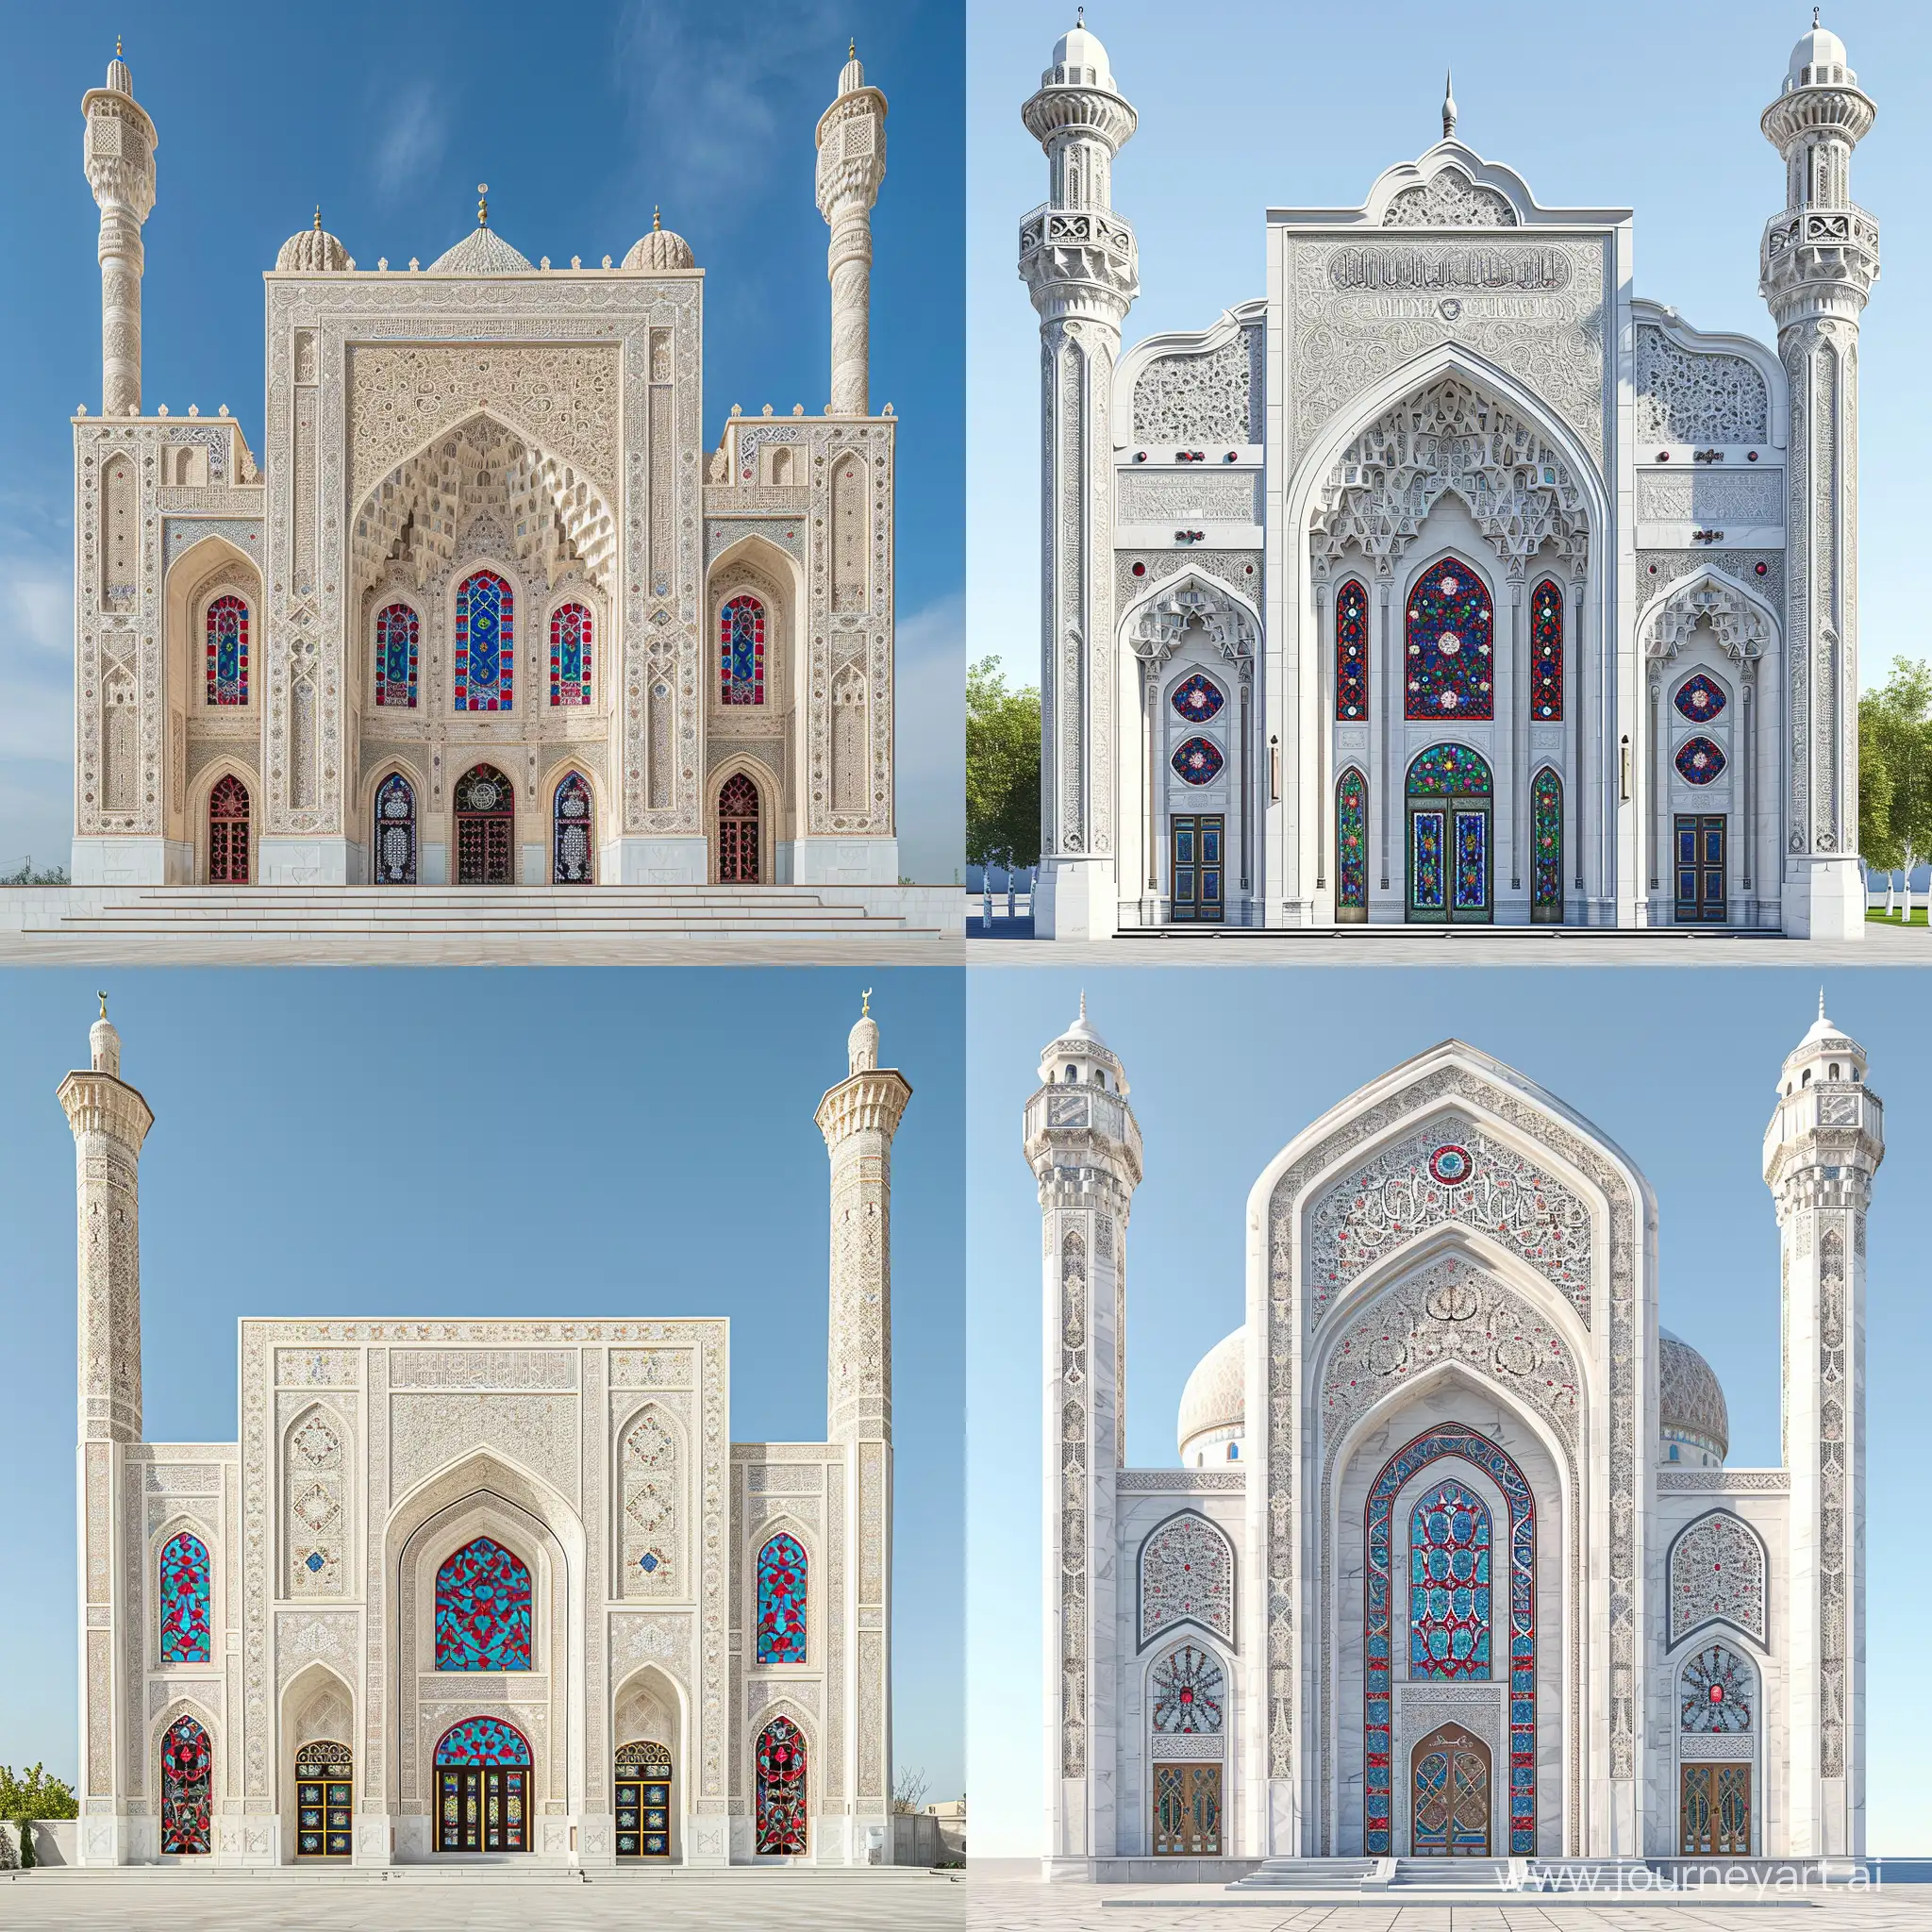 an Uzbekistan style mosque, highly decorated with decorated with arabesque carving, White marbled exterior, tall timurid iwan with muqarnas, persian stained glass windows, thin red blue persian floral design on spandrels, red blue gems and rubies embedded on islamic arabesque openwork ornaments, thin decorative minarets, full view, front view --v 6